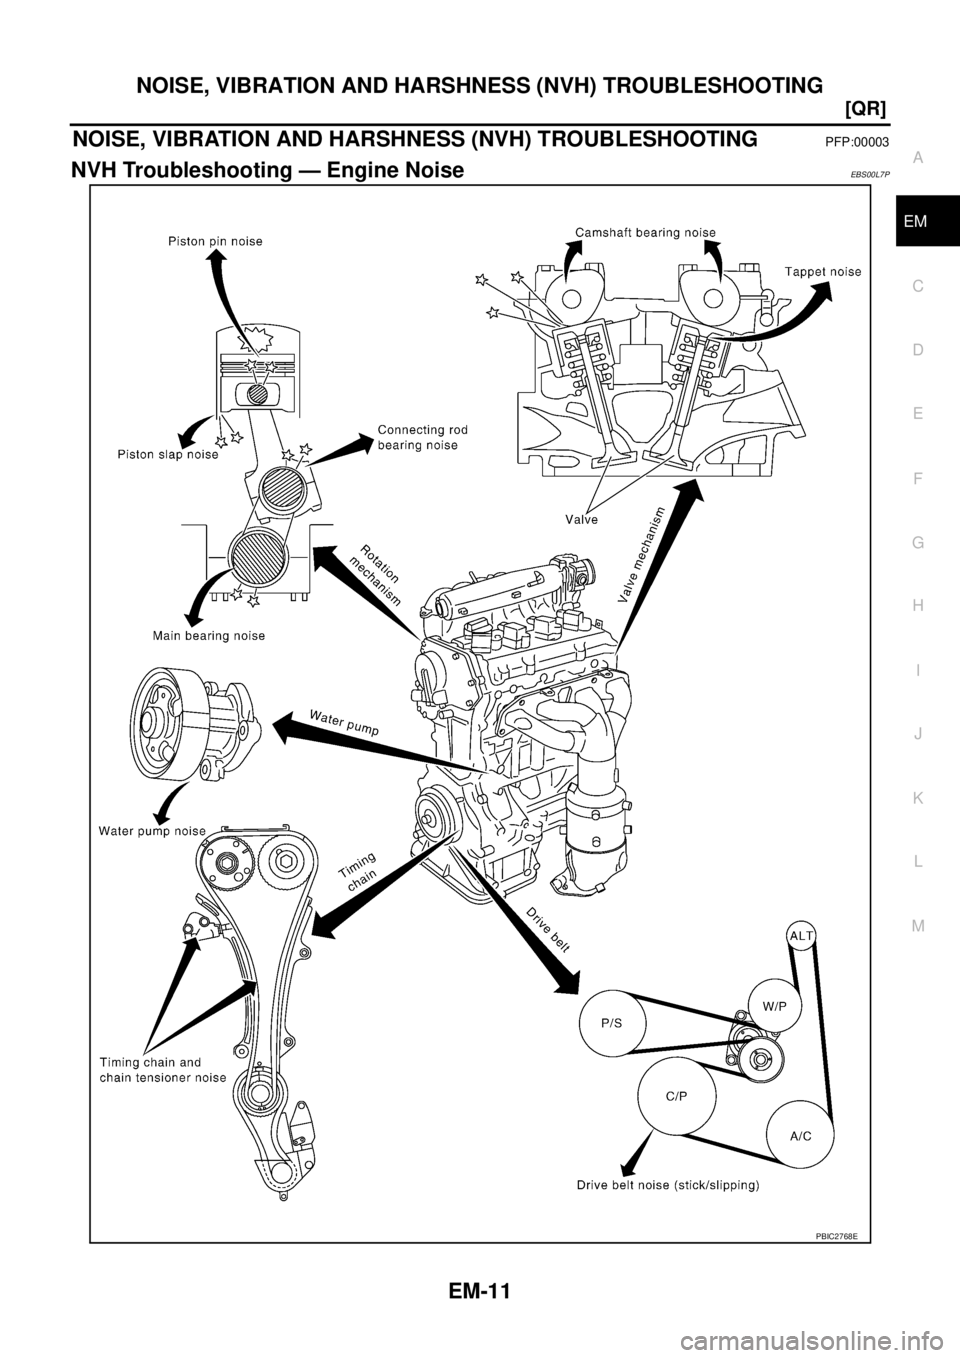 NISSAN X-TRAIL 2005  Service Owners Manual NOISE, VIBRATION AND HARSHNESS (NVH) TROUBLESHOOTING
EM-11
[QR]
C
D
E
F
G
H
I
J
K
L
MA
EM
 
NOISE, VIBRATION AND HARSHNESS (NVH) TROUBLESHOOTINGPFP:00003
NVH Troubleshooting — Engine NoiseEBS00L7P
P